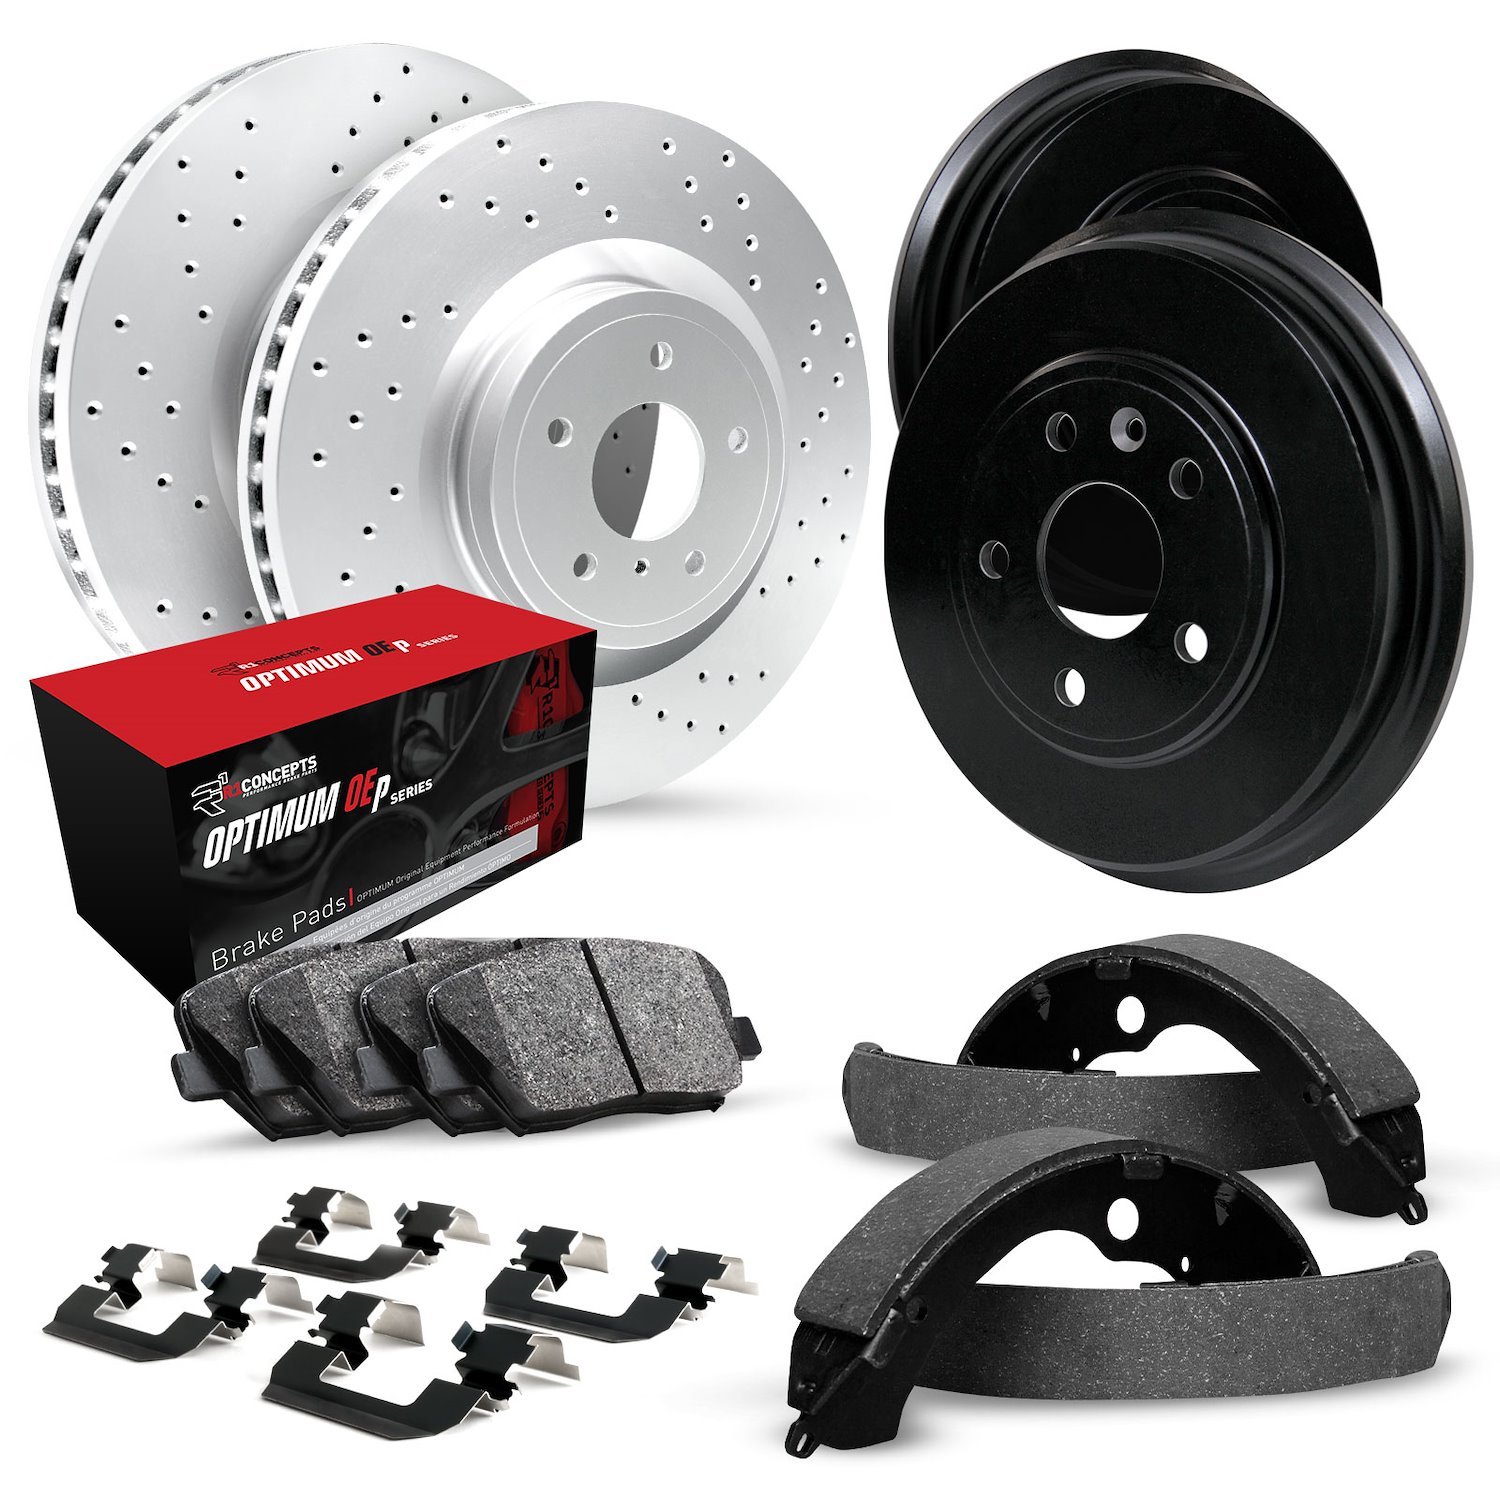 GEO-Carbon Drilled Brake Rotor & Drum Set w/Optimum OE Pads, Shoes, & Hardware, 1971-1973 GM, Position: Front & Rear